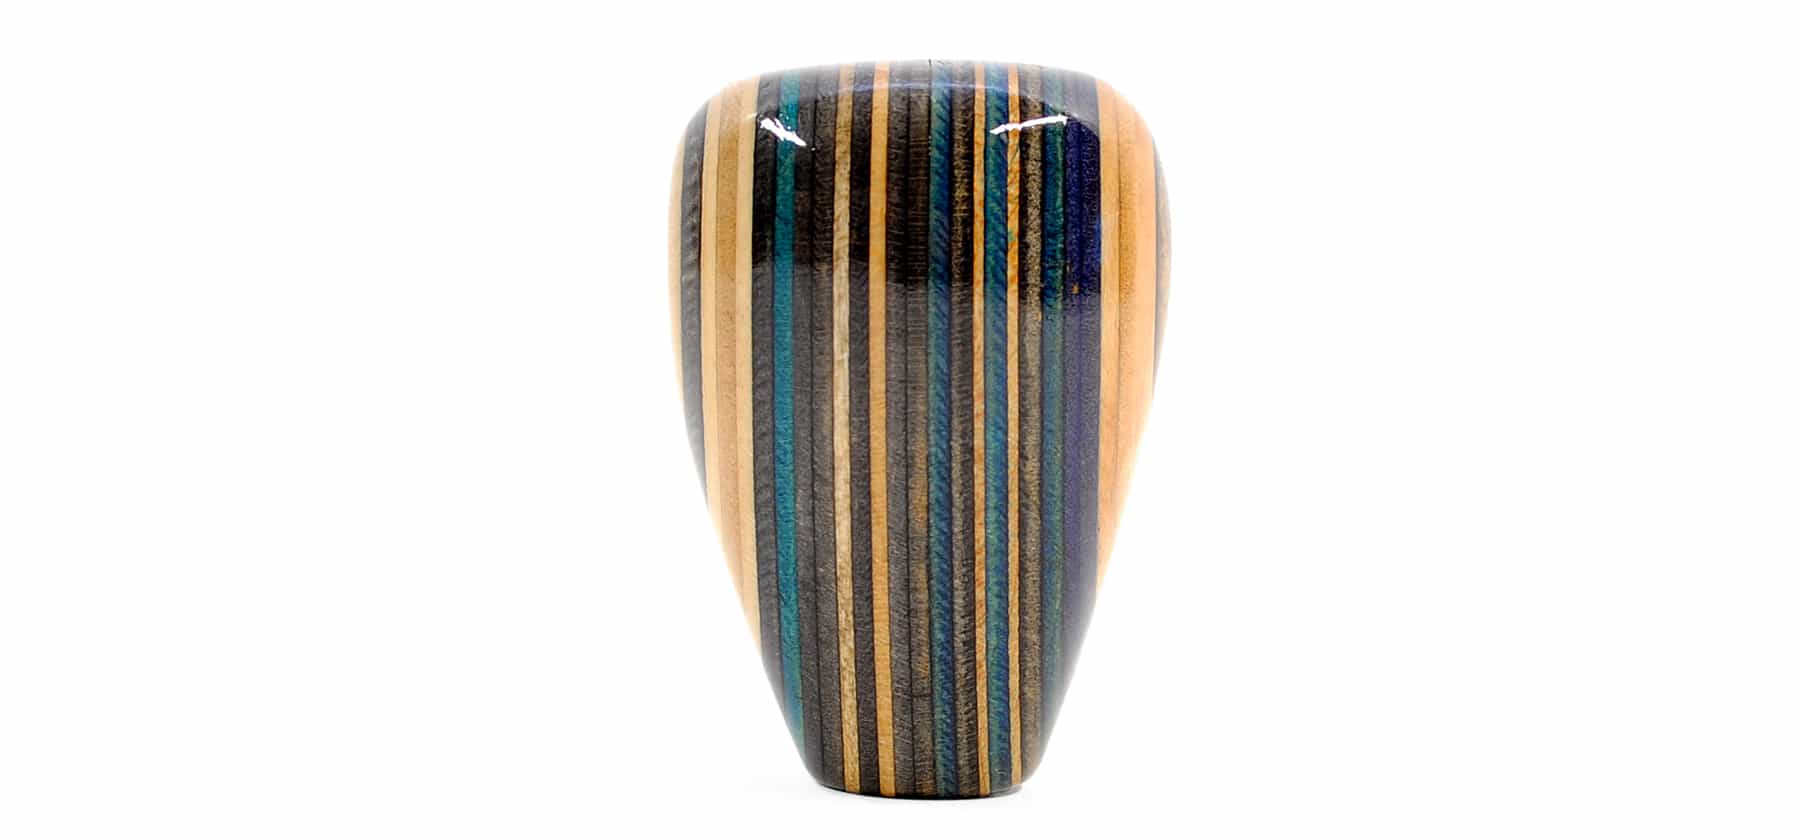 teardrop blue shift knobs with vertical layers